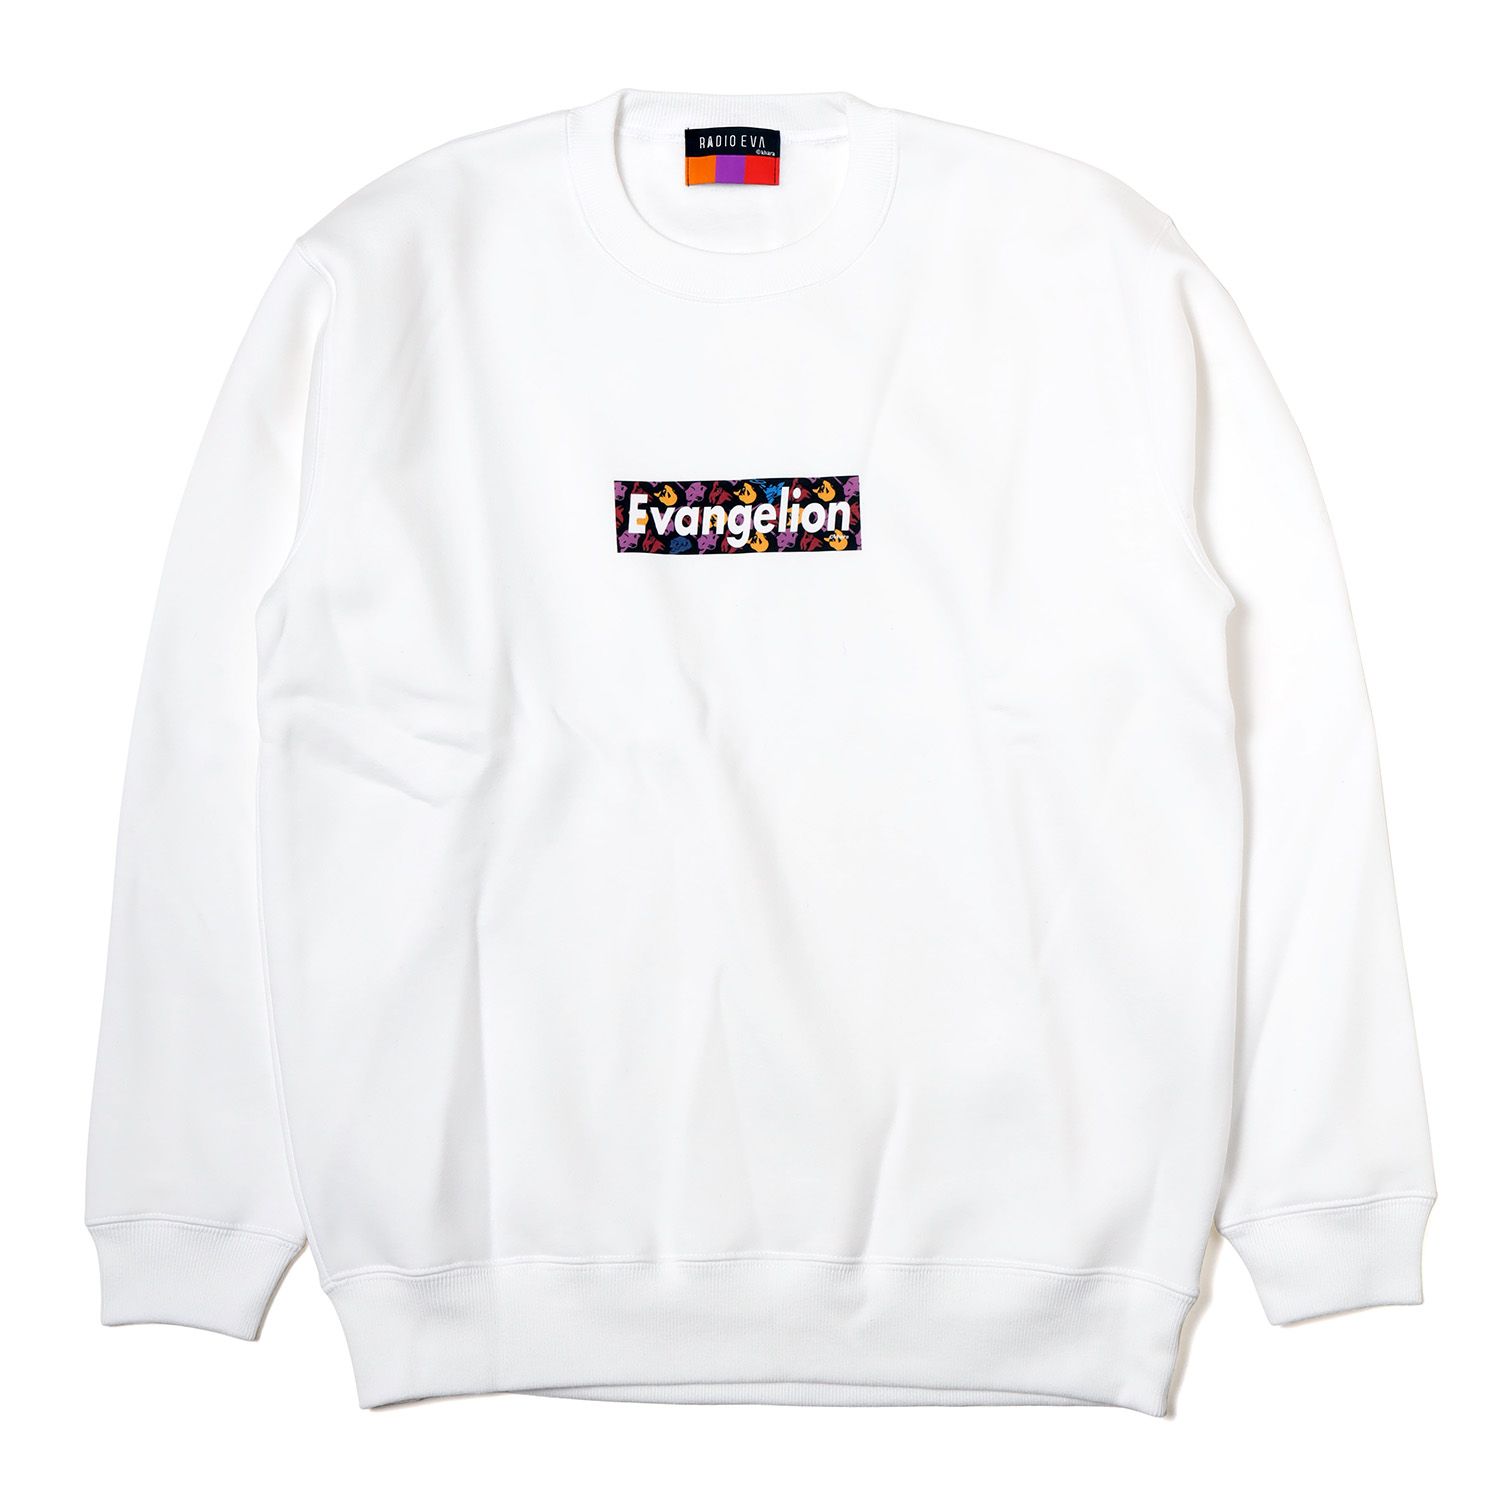 Evangelion Store Releases New Sweater Collection With Supreme-Like